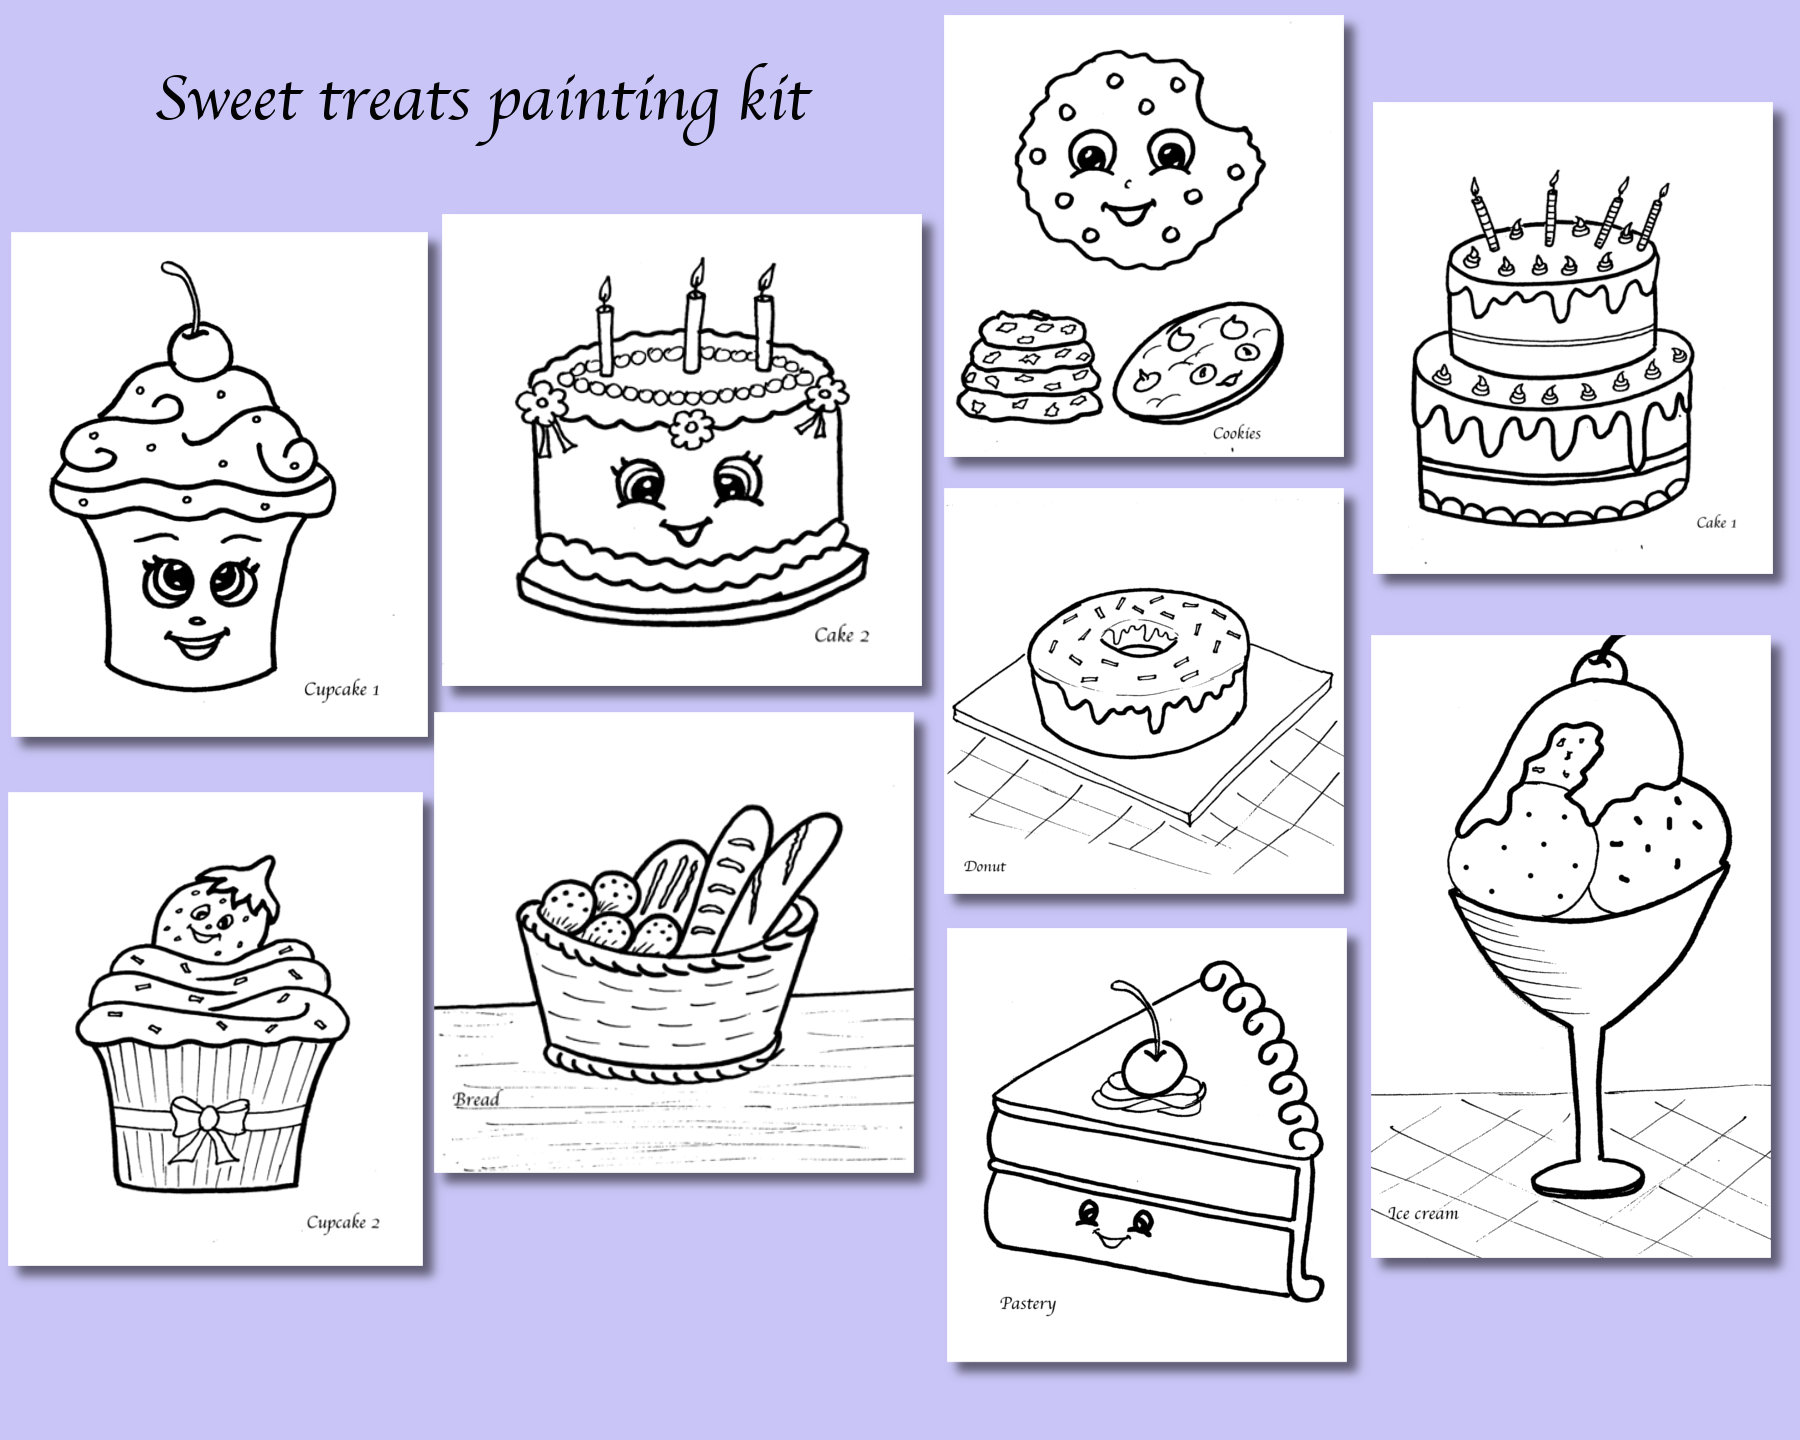 DIY Painting Kit-sweet Treats, Pre Drawn Canvas, Cookies, Kids Paint Party,  Party Favors, Art Party, Ice Cream Canvas,donut,cake, Cup Cake 